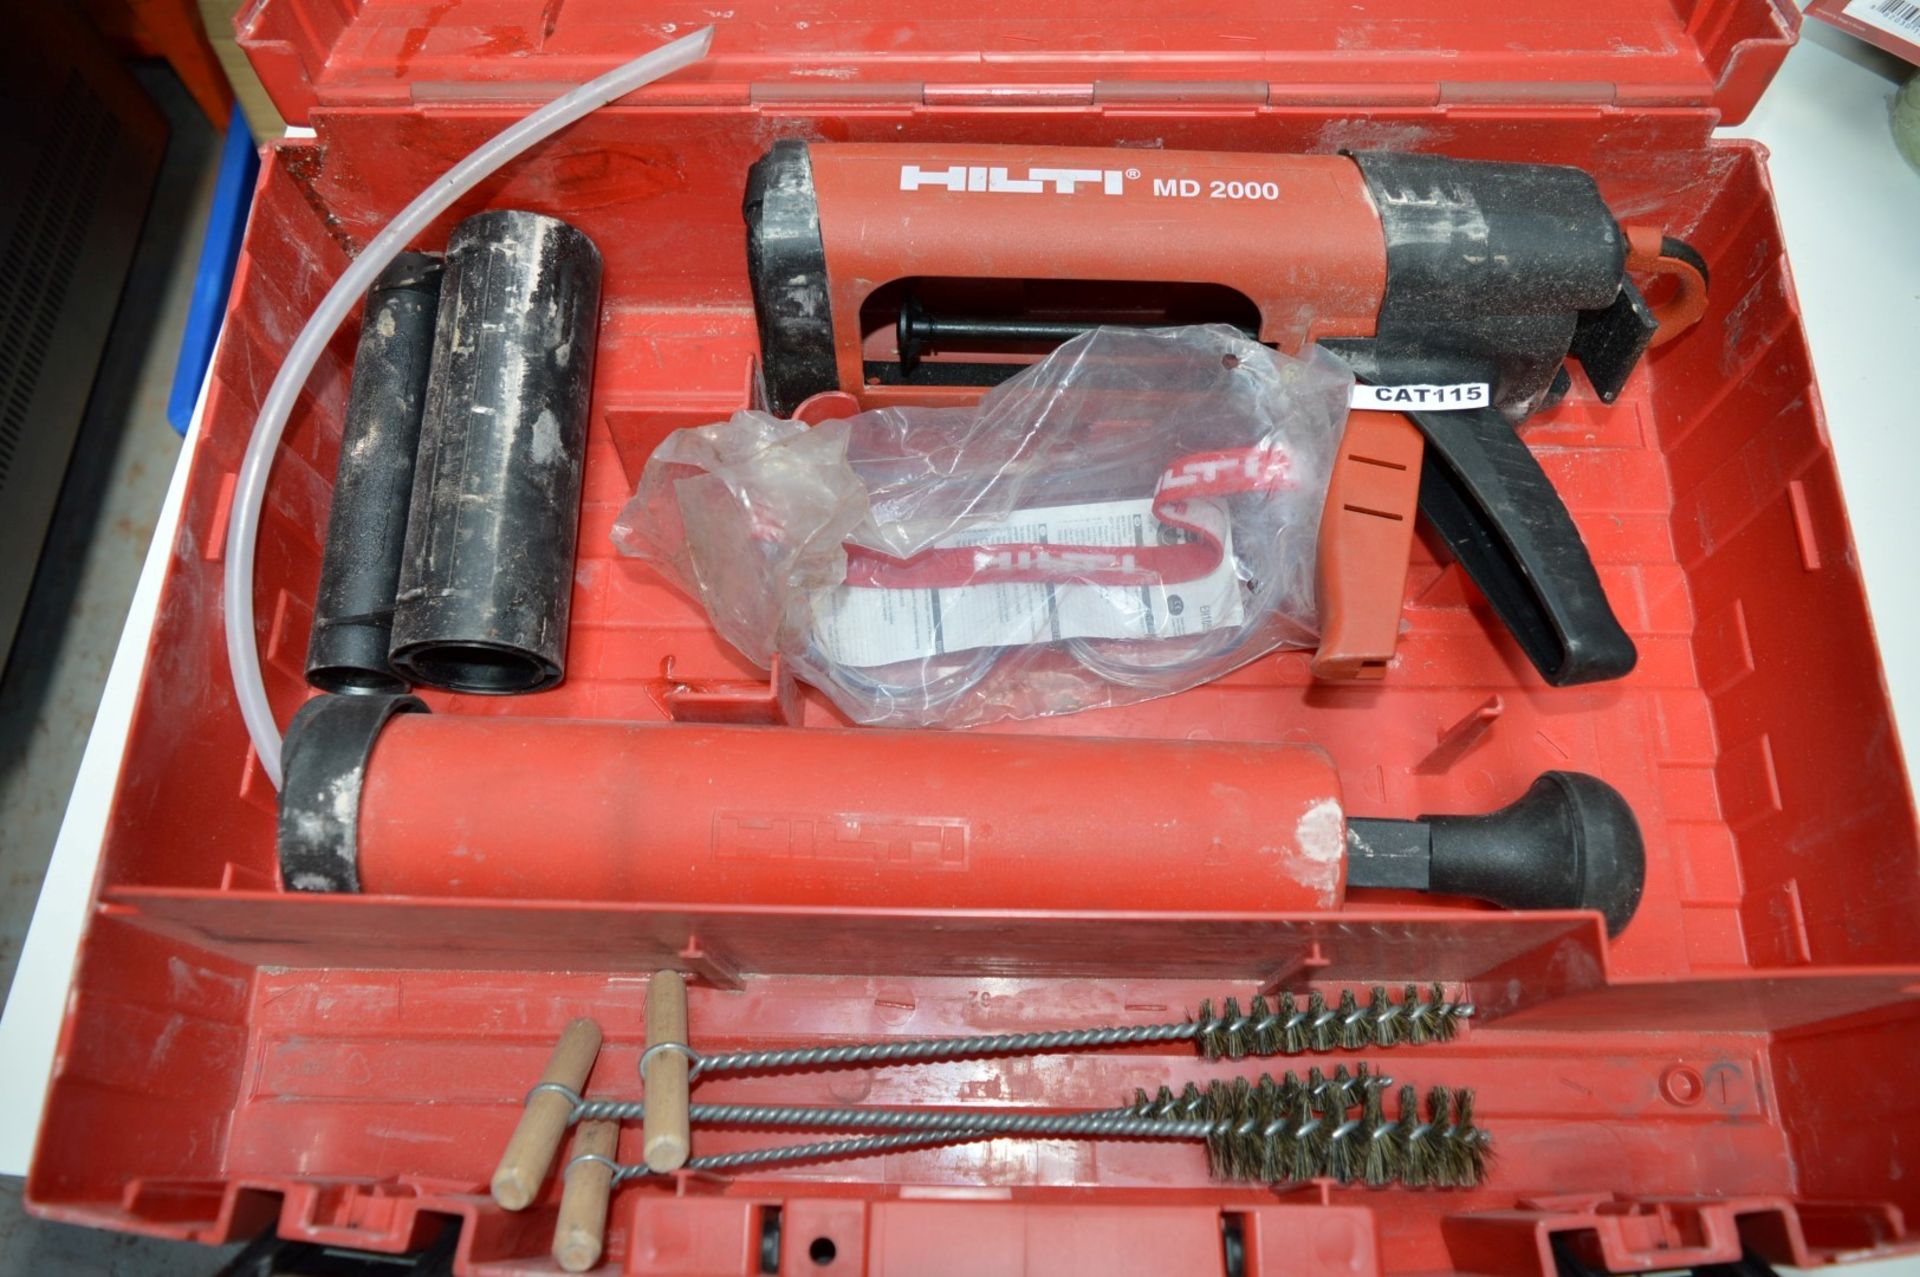 1 x Hilti MD2000 Manual HIT Adhesive Dispenser With Case, Pump, Brushes and Goggles - CL300 - Ref